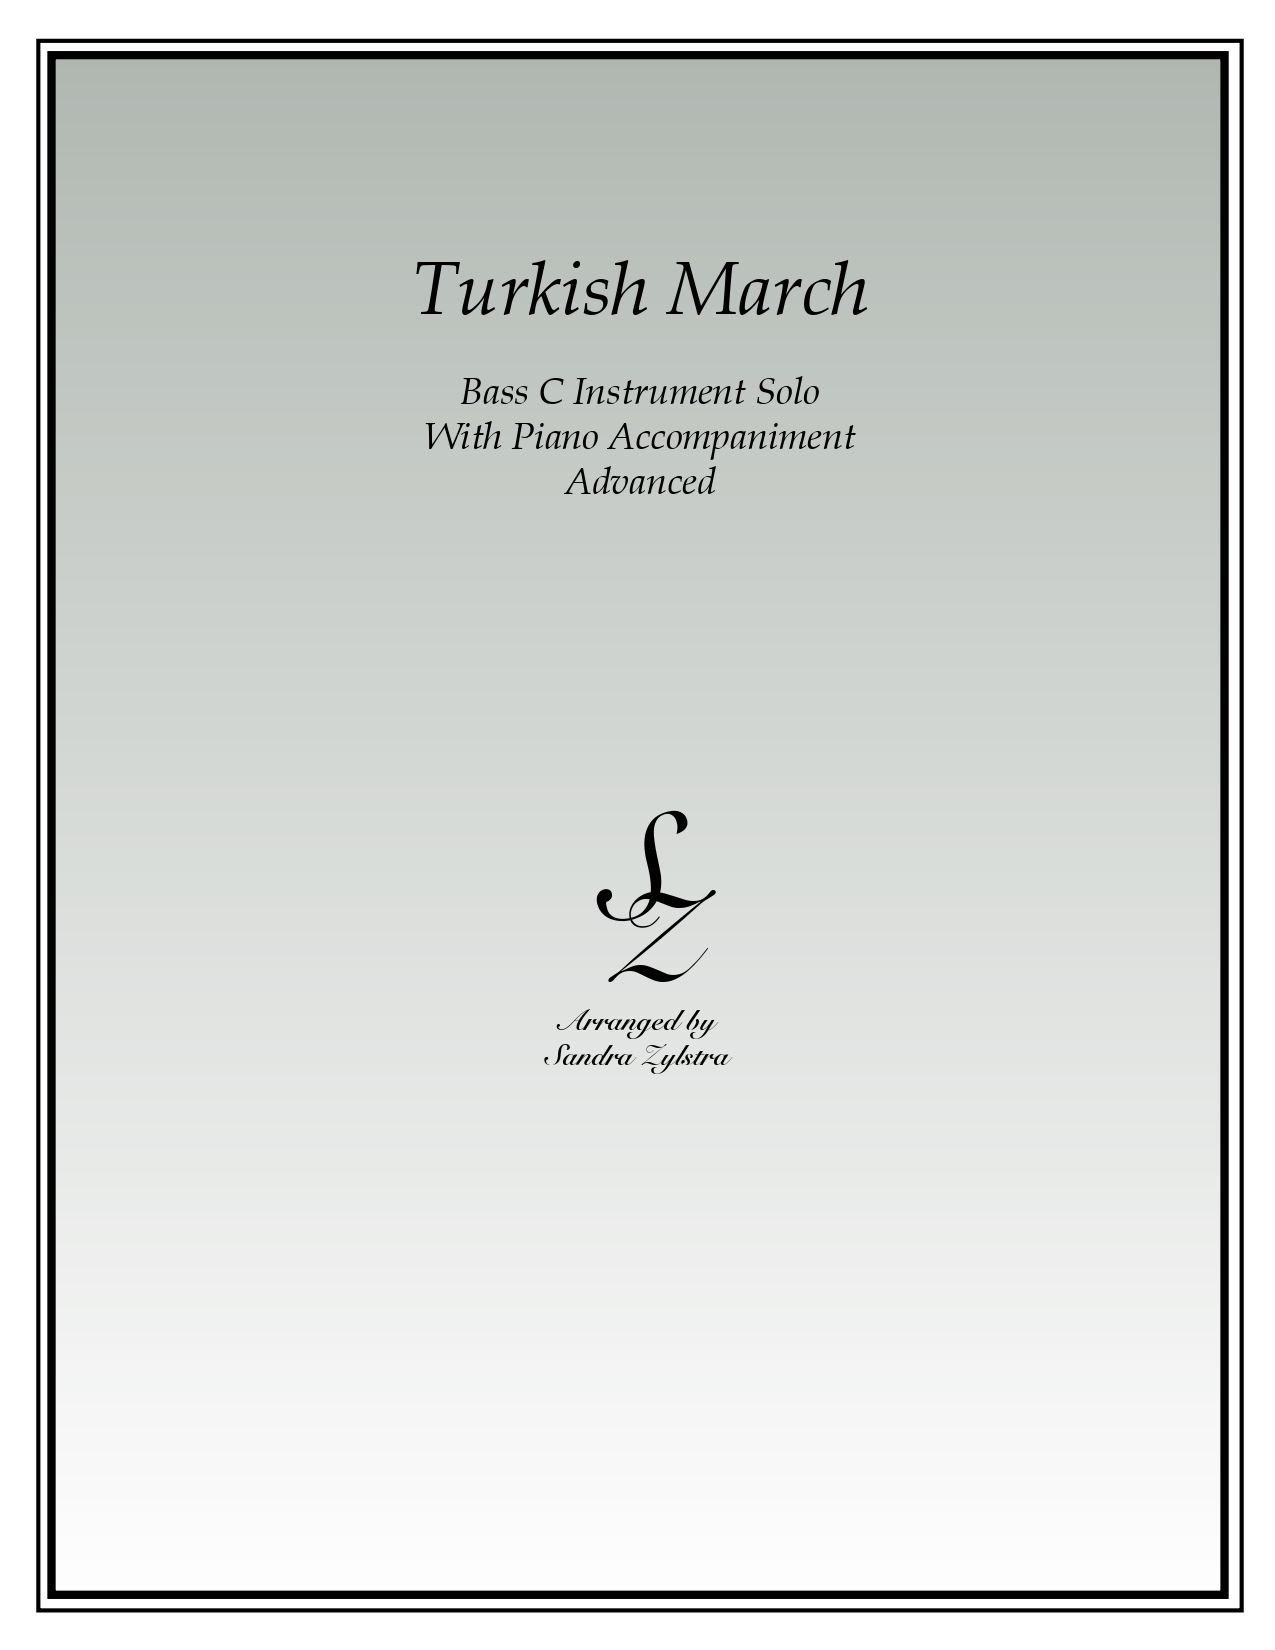 Turkish March bass C instrument solo part cover page 00011